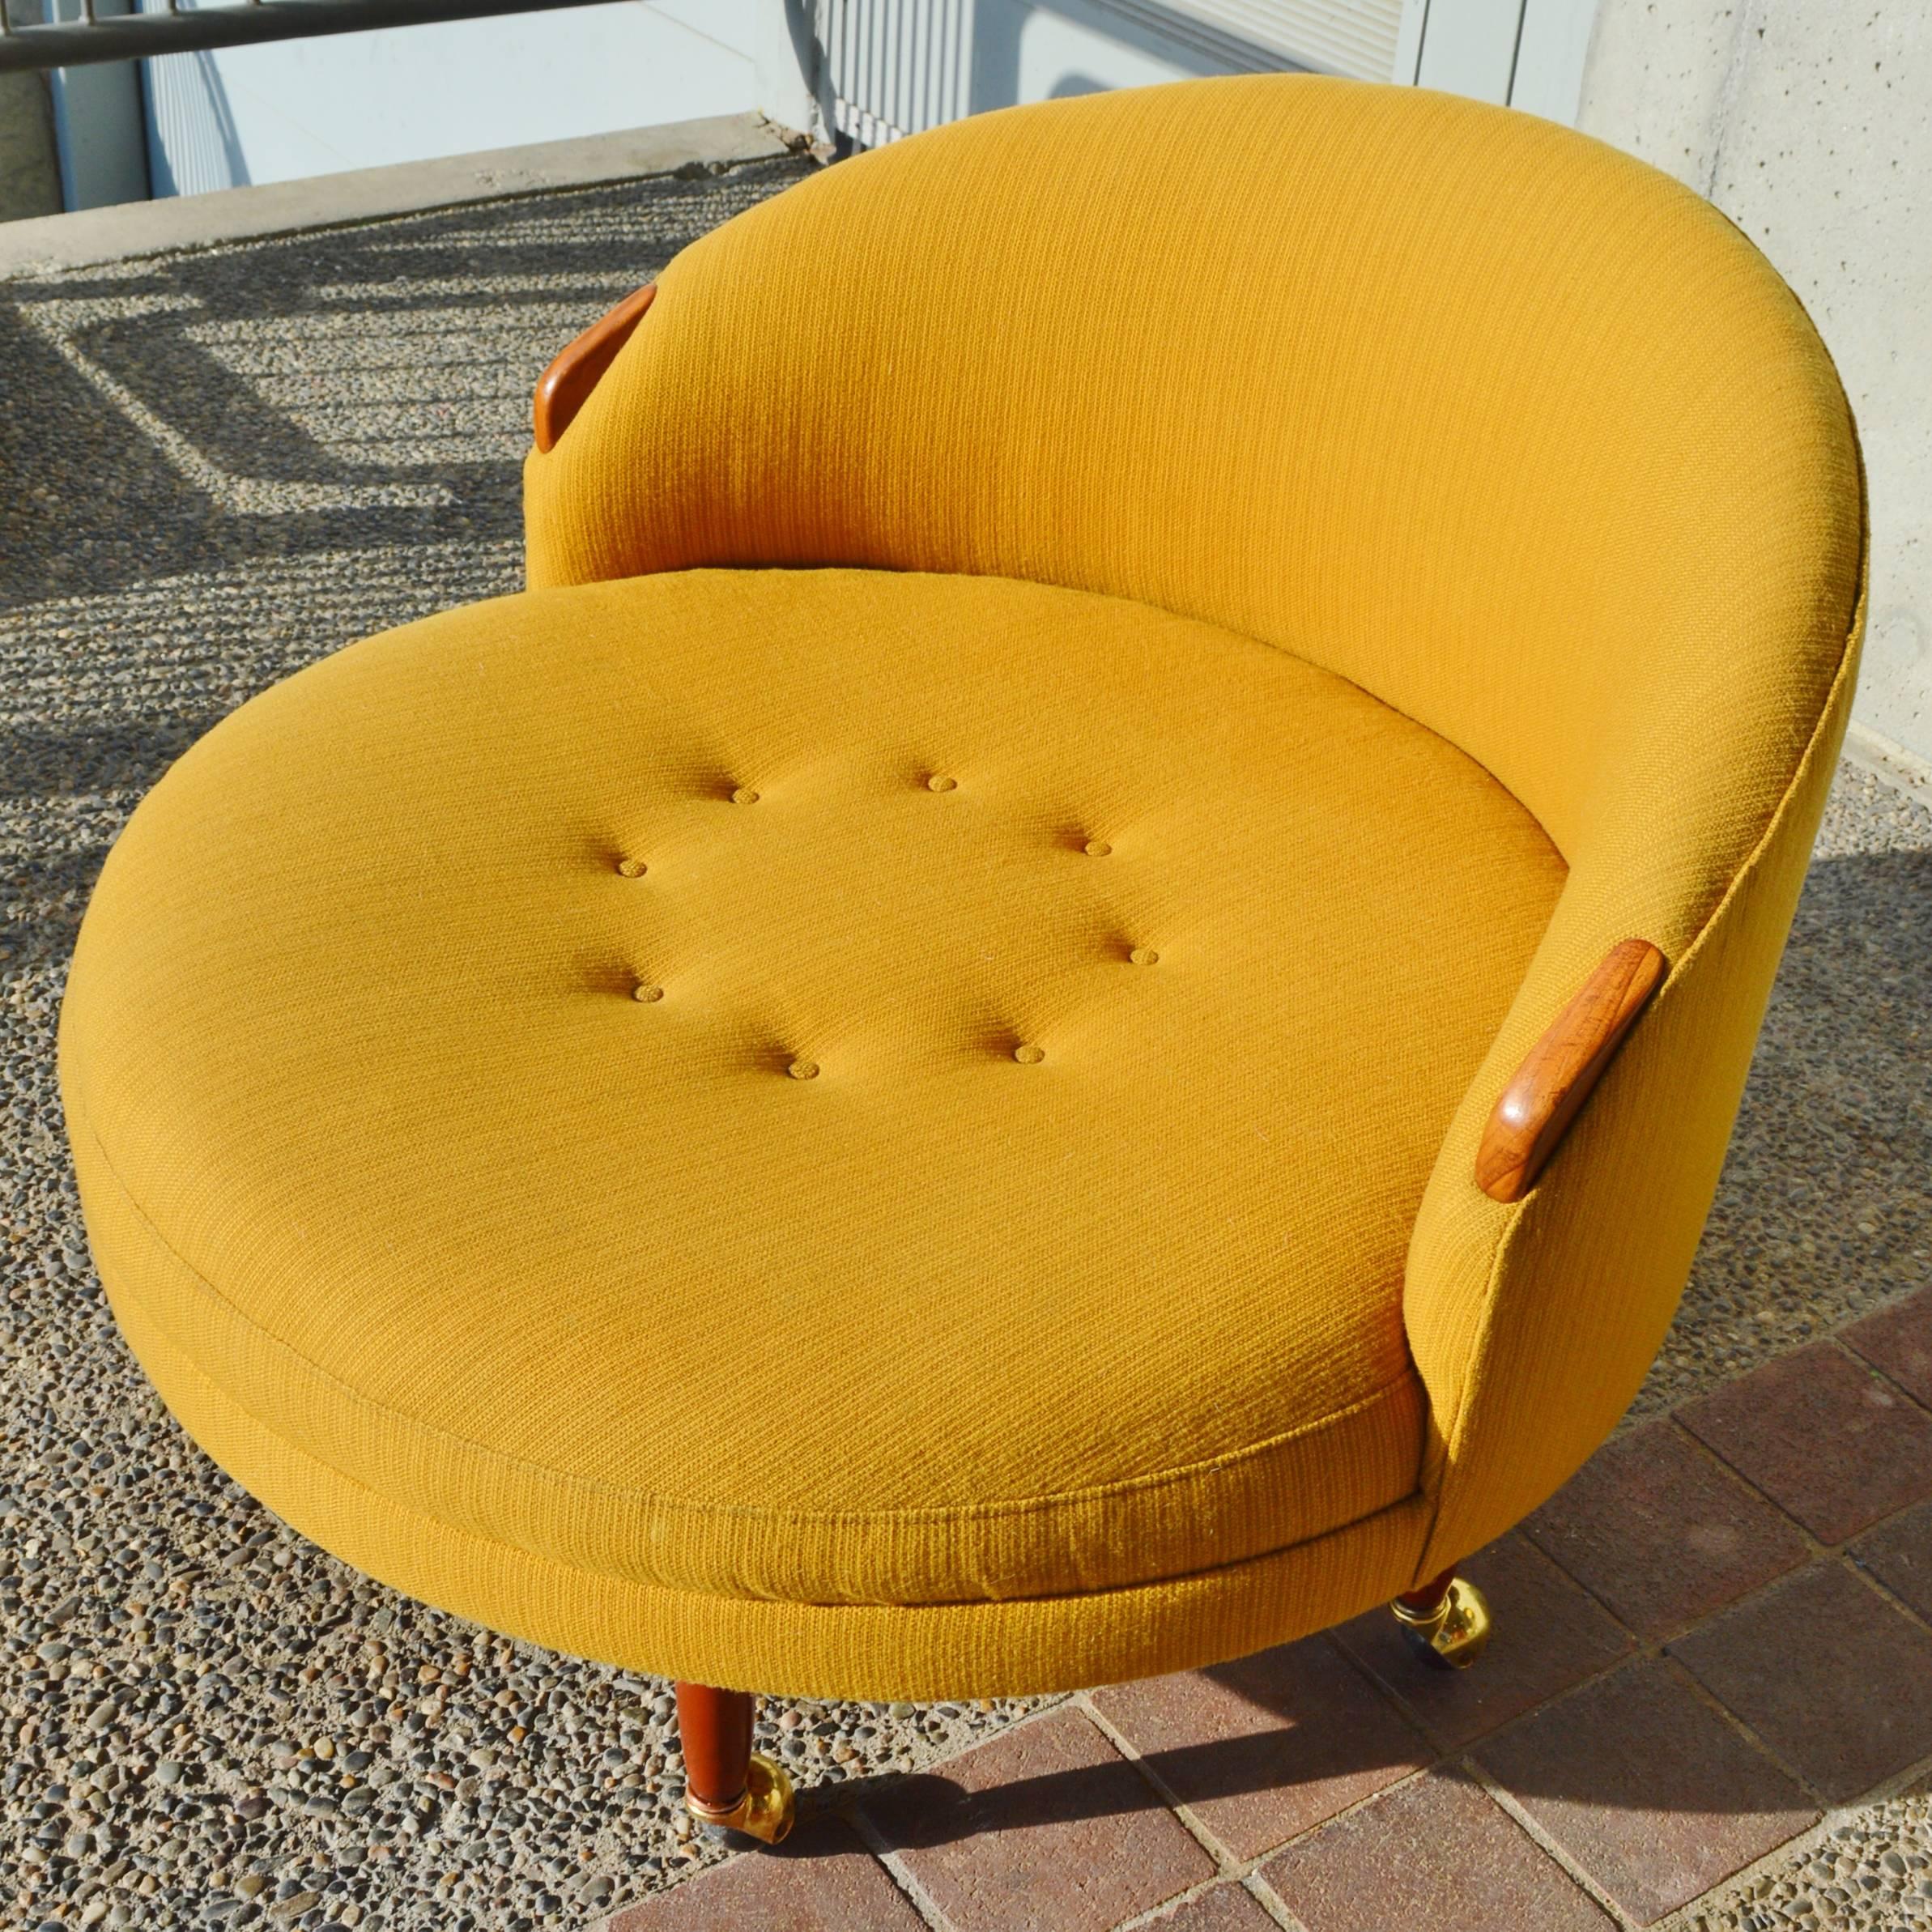 This iconic Mid-Century Modern design by Adrian Pearsall for Craft Associates in the 1960s is quite delightful! Featuring the original mustard upholstery in excellent condition with no tears or stains and whimsical walnut armrests and the Classic